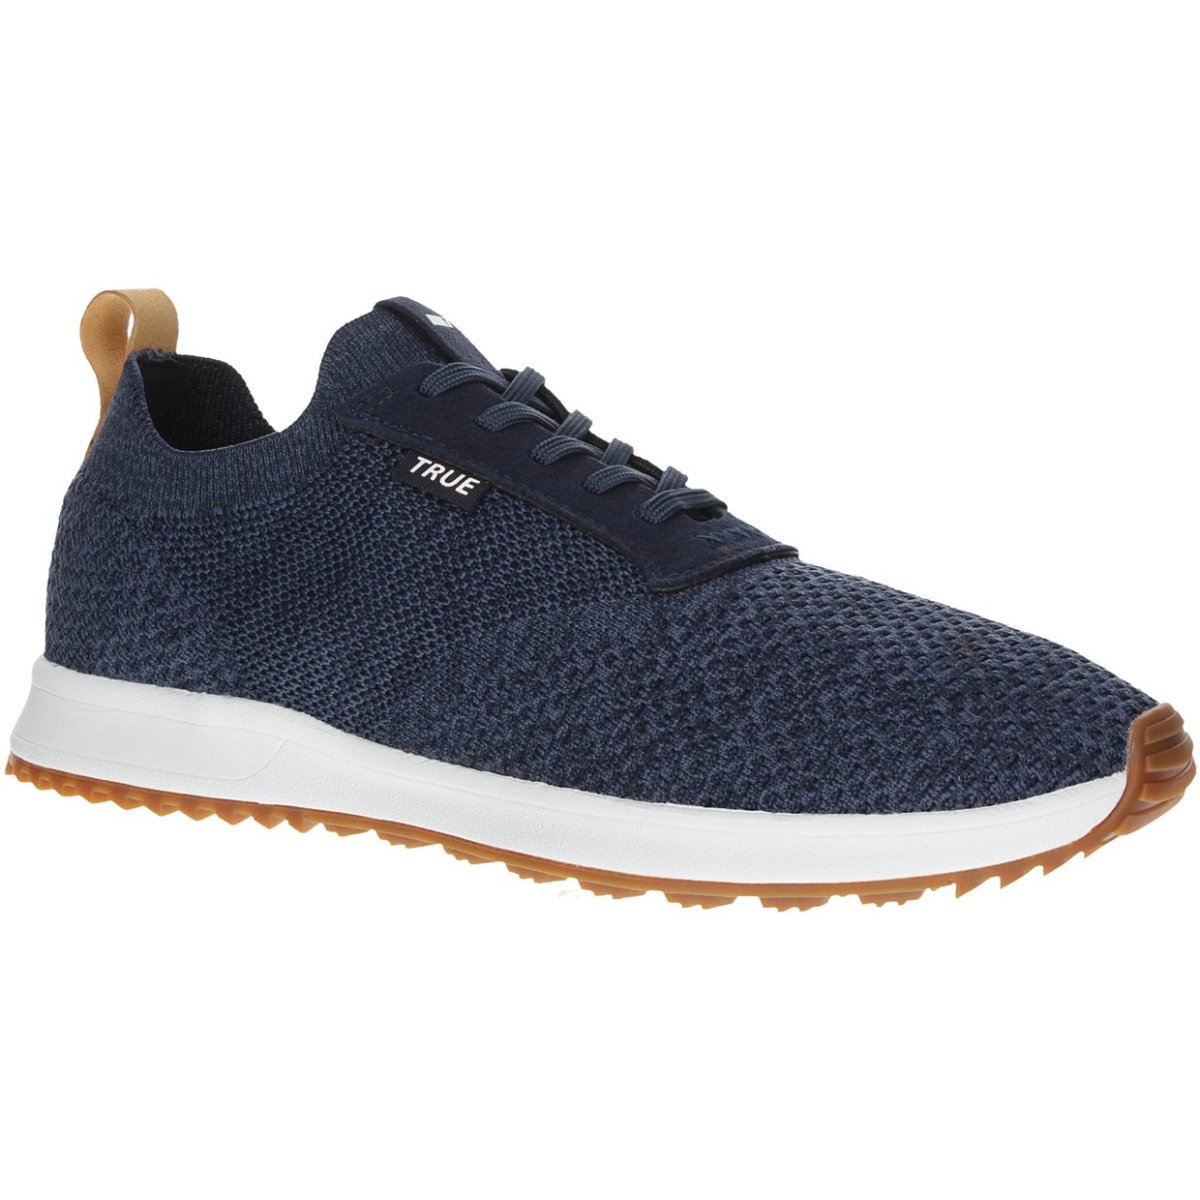 Shop the latest True Linkswear golf shoes for men, like the True Knit II spikeless golf shoes, on Morning Read's online pro shop, powered by GlobalGolf.